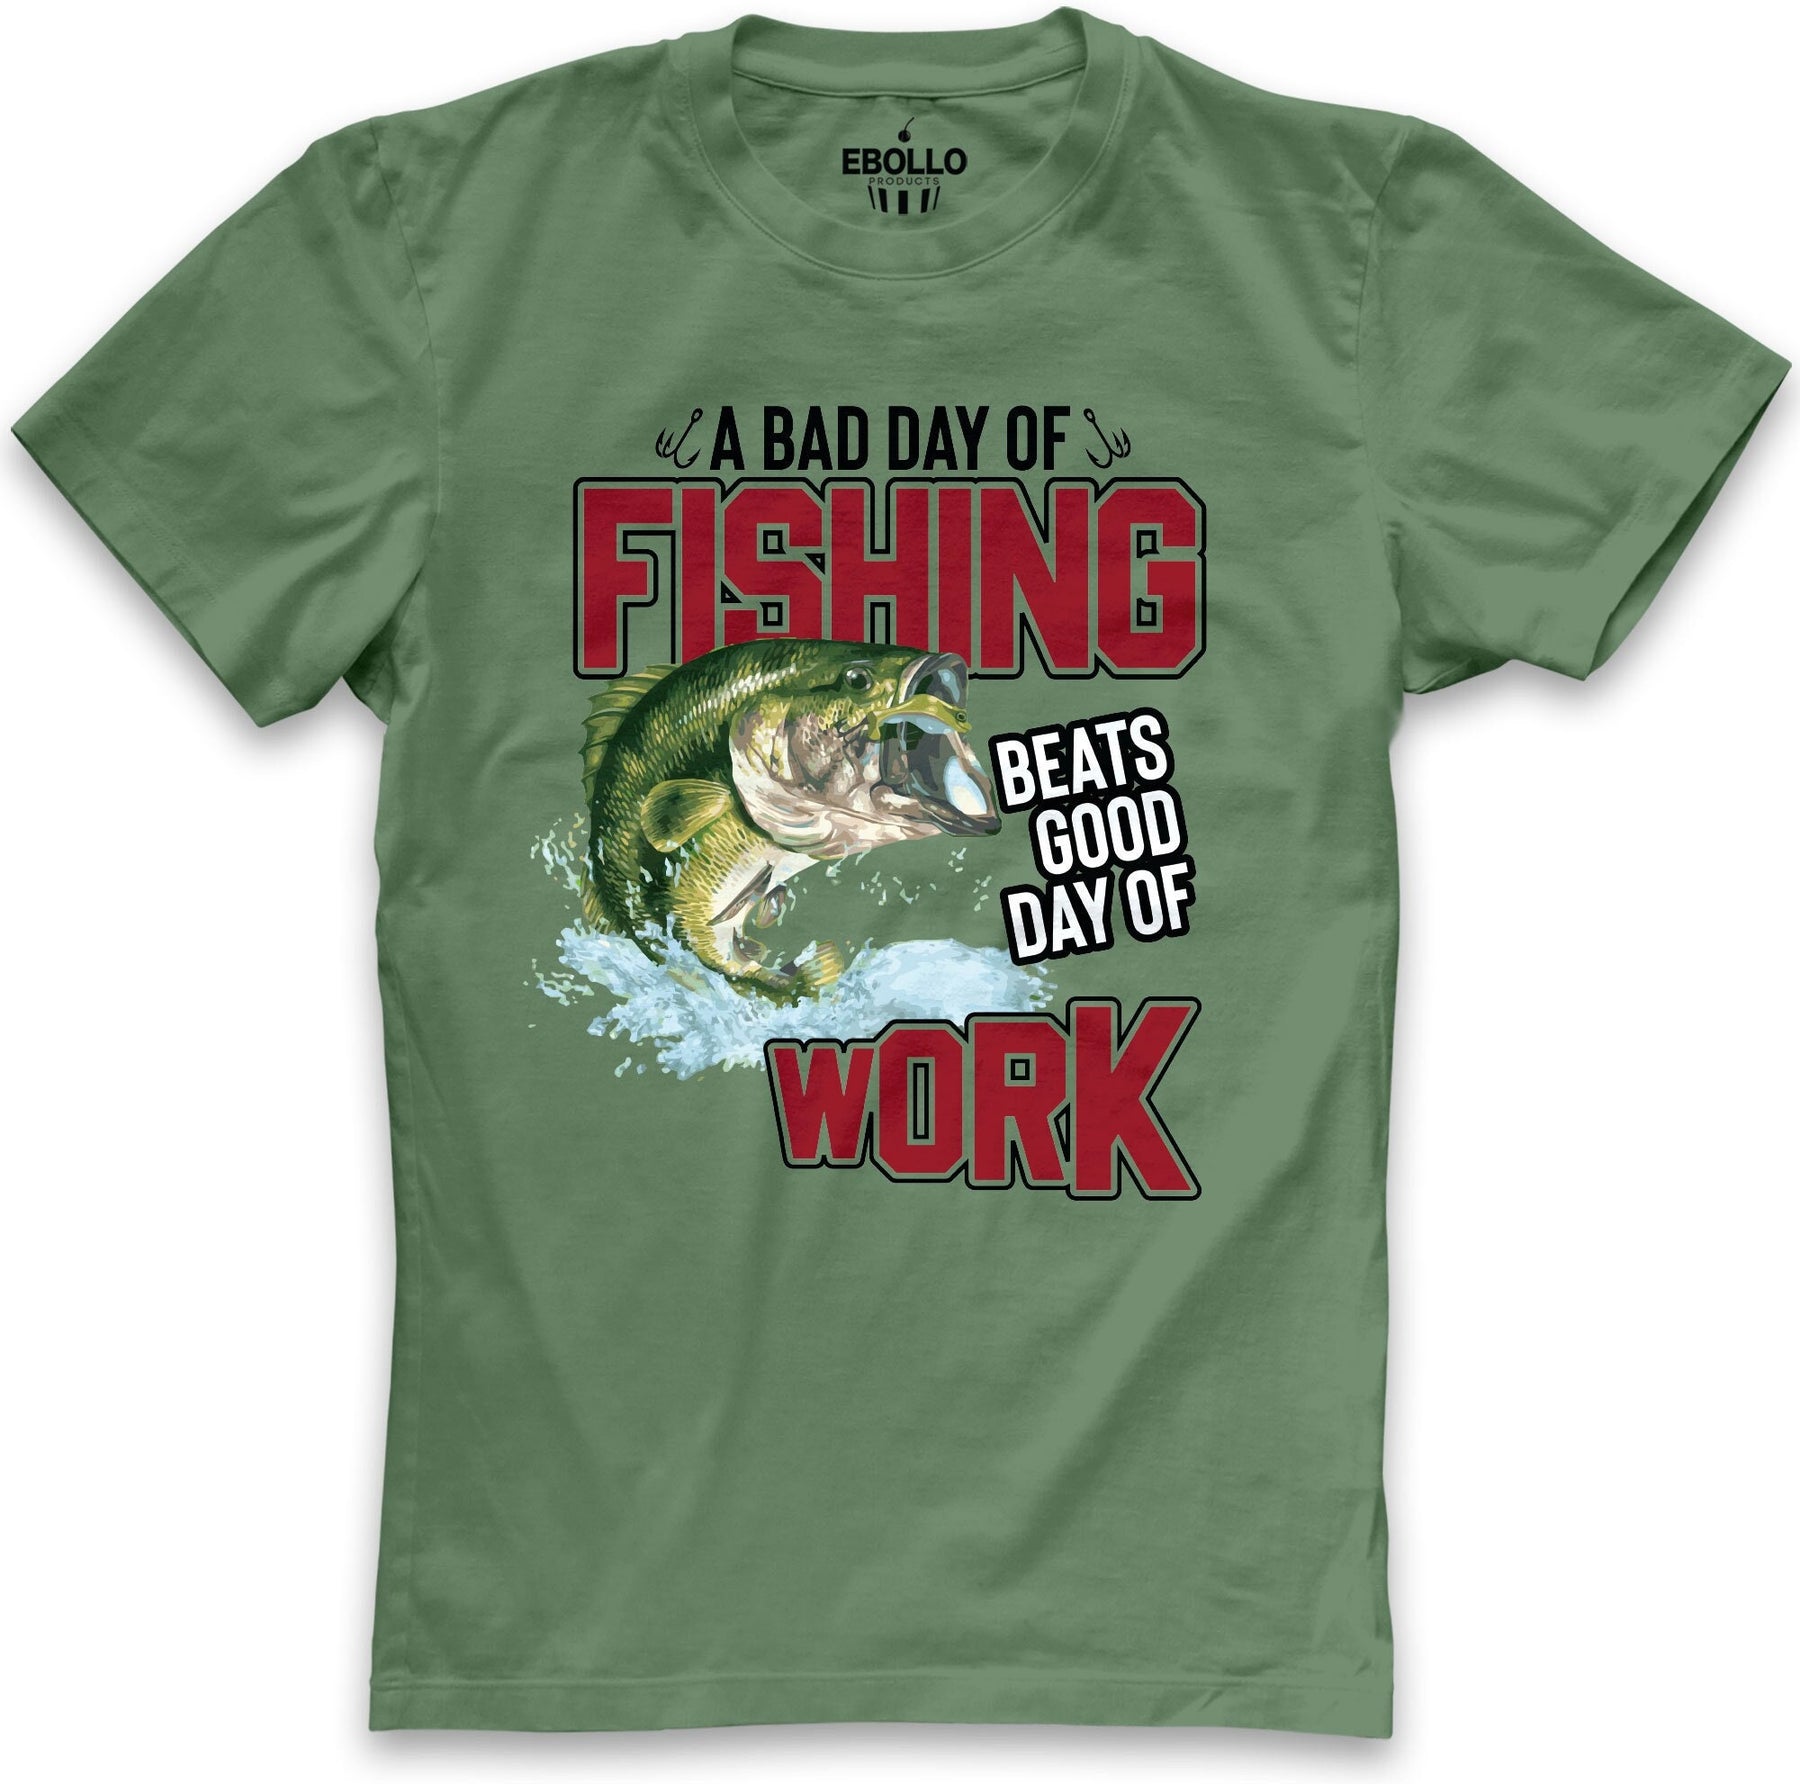 Mens Fishing T Shirt, A Day of Fishing Beats Good Day of Work Shirt, Funny Fishing Shirt - Fisherman Gifts - Fathers Day Gift - Dad Gift